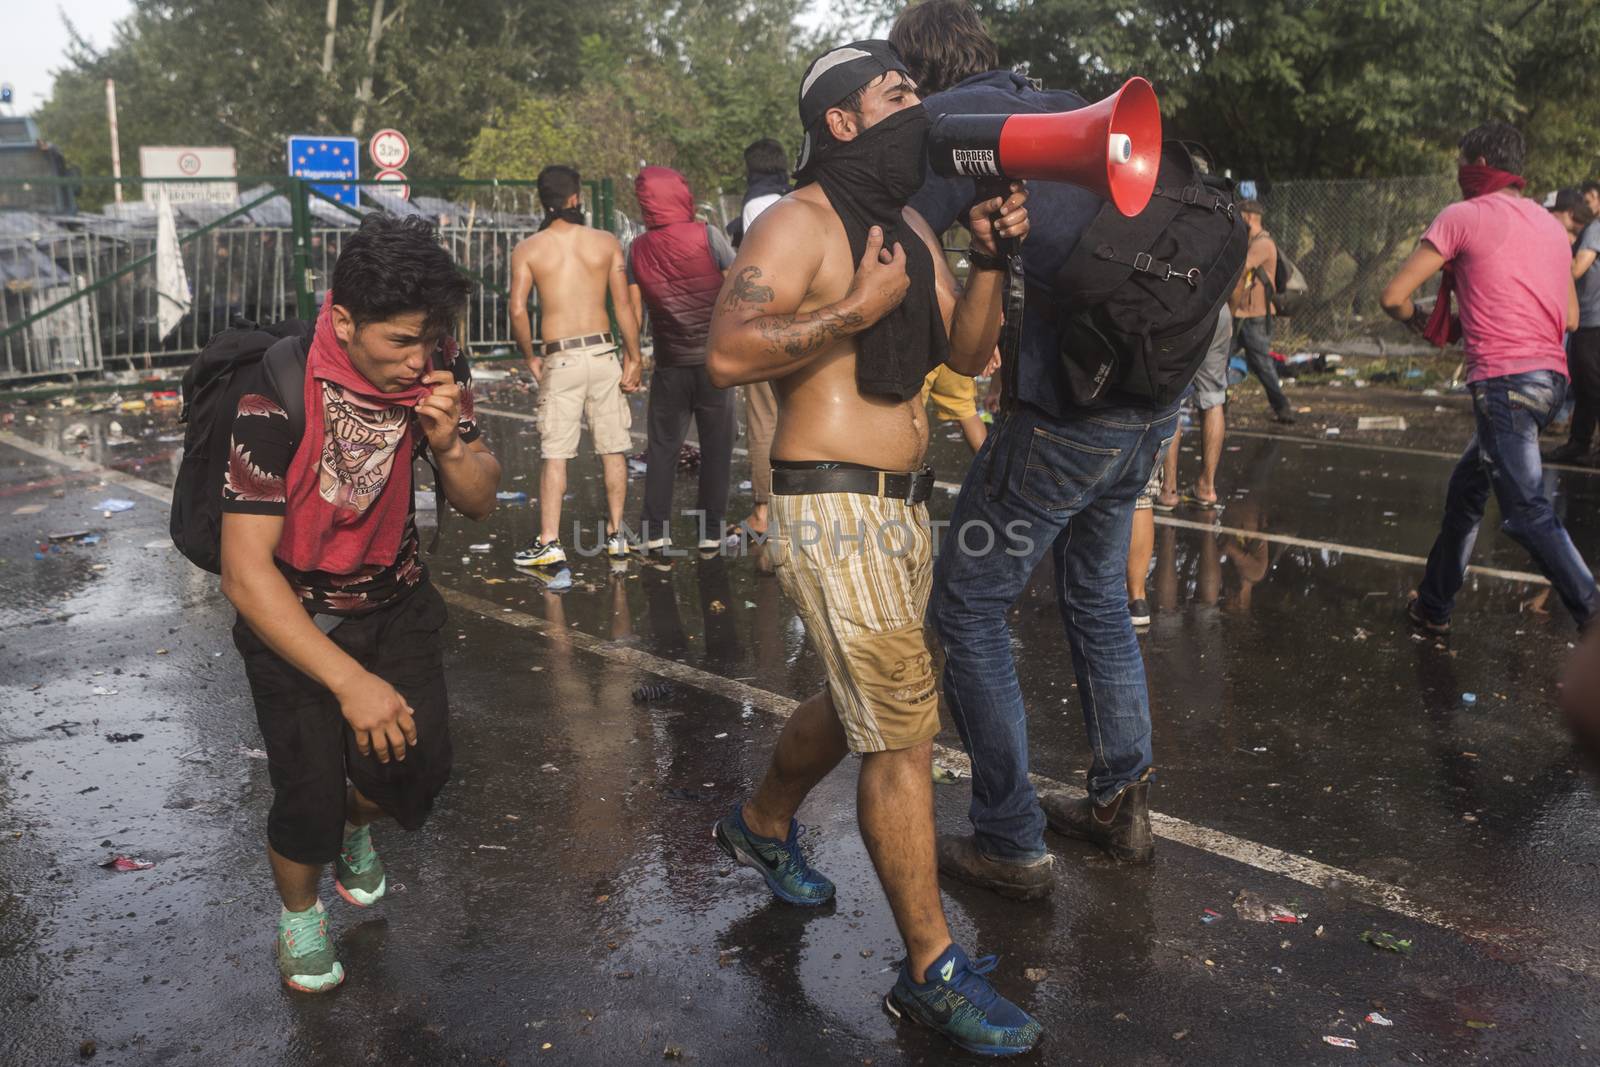 SERBIA, Horgos: Hungarian police fire tear gas and water cannons into the refugees in the Serbian border town of Horgos on September 16, 2015, after Hungary closed its border in an effort to stem the wave of refugees entering the country. 